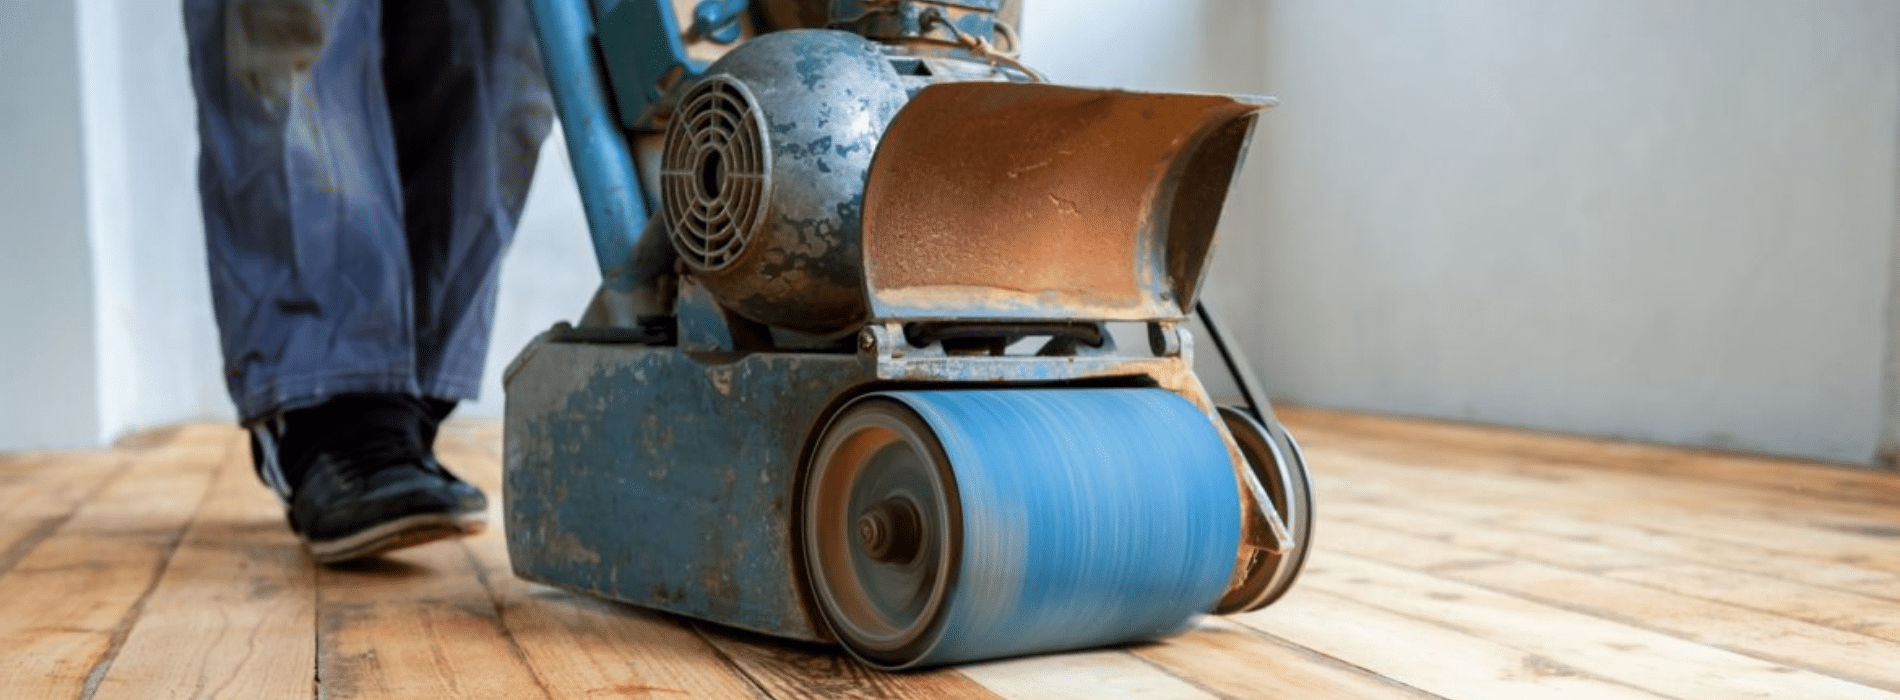 Mr Sander® use the Bona Belt, a powerful 2.2 kW sander for sanding herringbone floors in Coulsdon, CR5. Operating at 230V with a frequency of 50Hz/60Hz, it ensures efficient results. Coupled with a dust extraction system equipped with a HEPA filter, it guarantees a clean and flawless finish. 